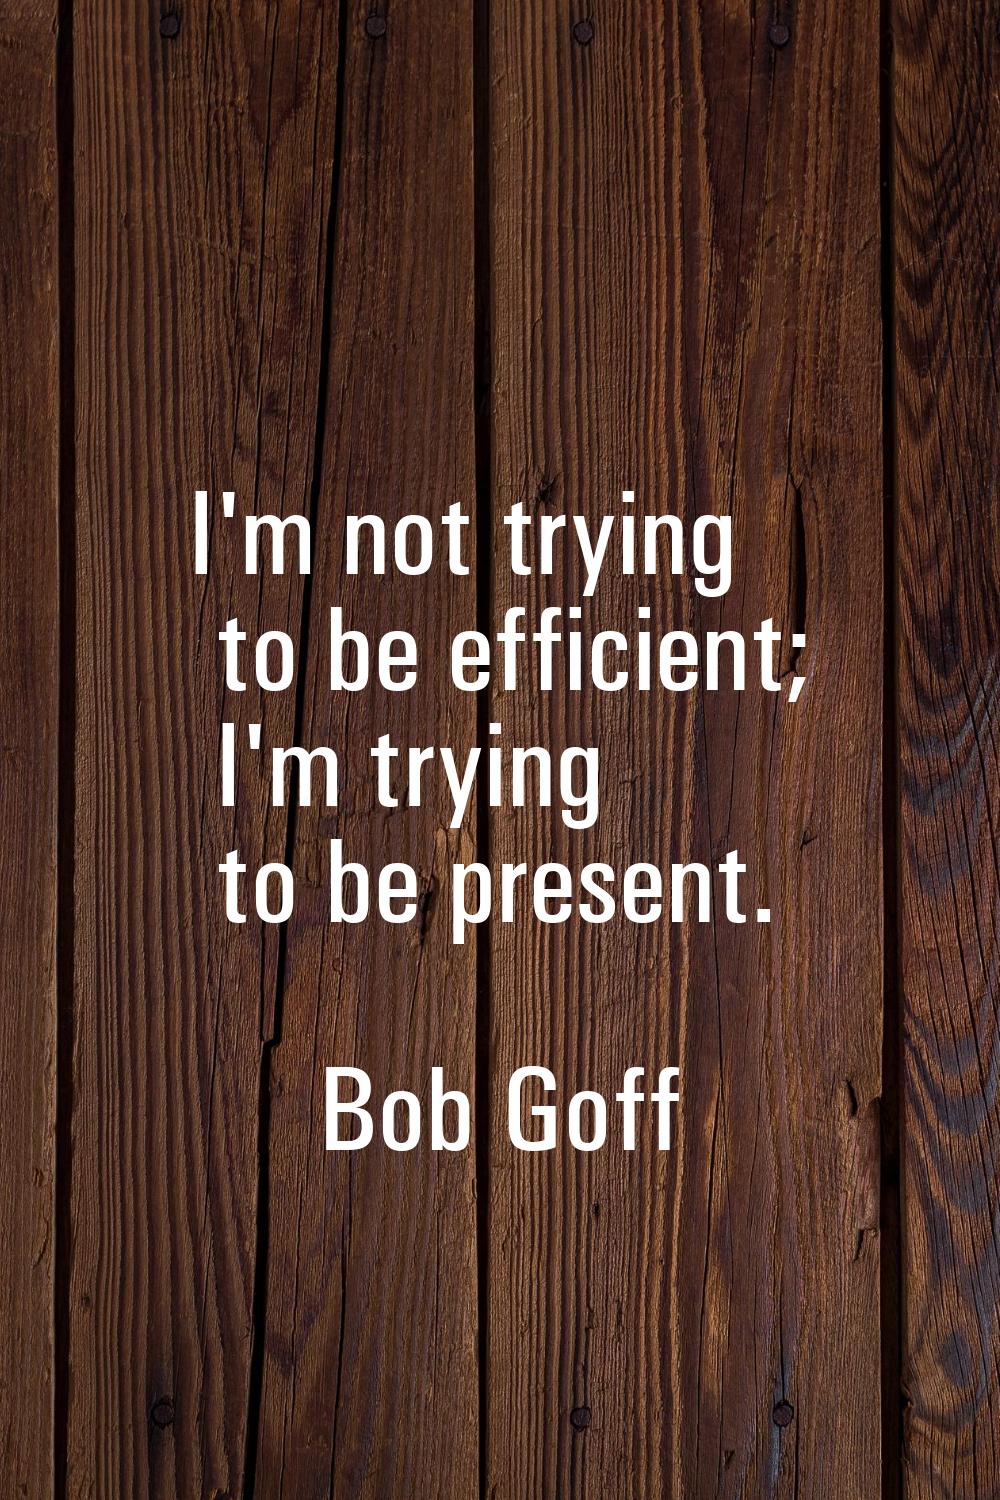 I'm not trying to be efficient; I'm trying to be present.